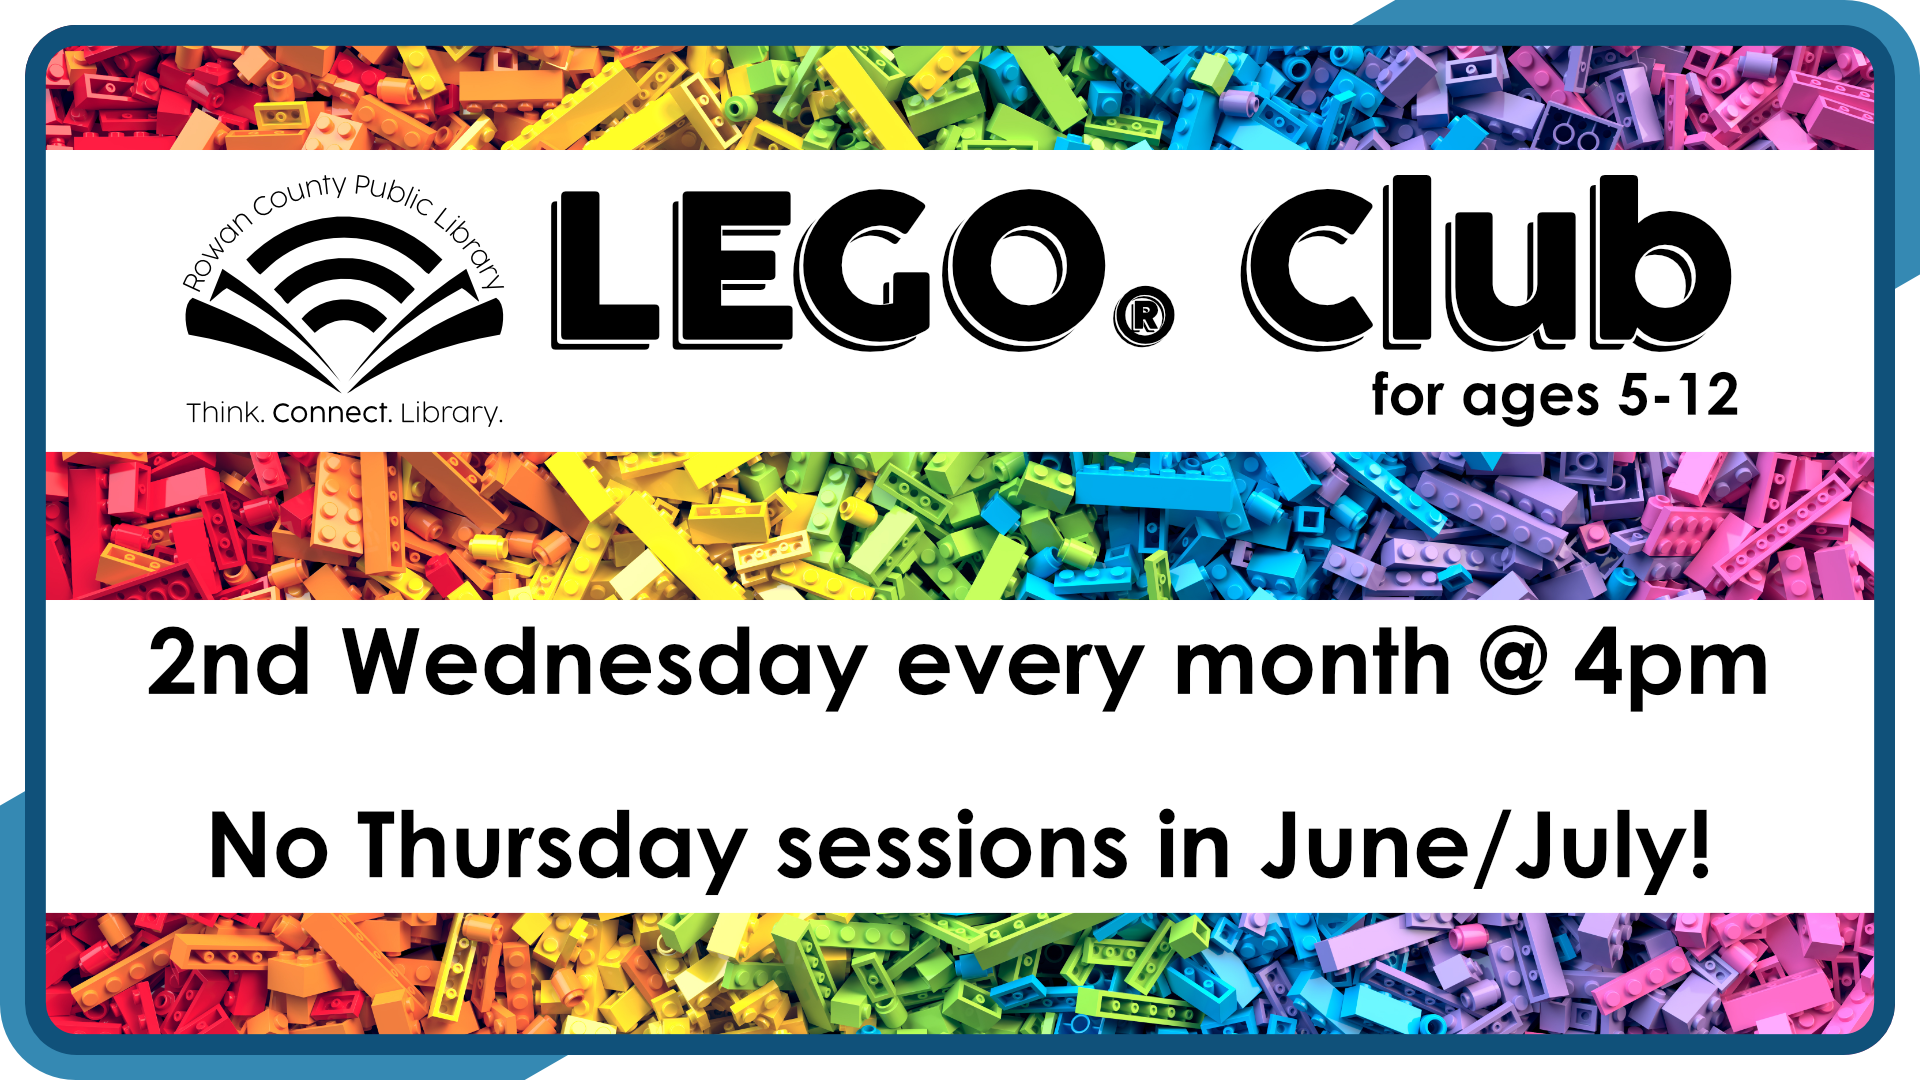 LEGO® Club, second Wednesday monthly at 4pm, no Thursday sessions in June and July, intended for ages 5-12